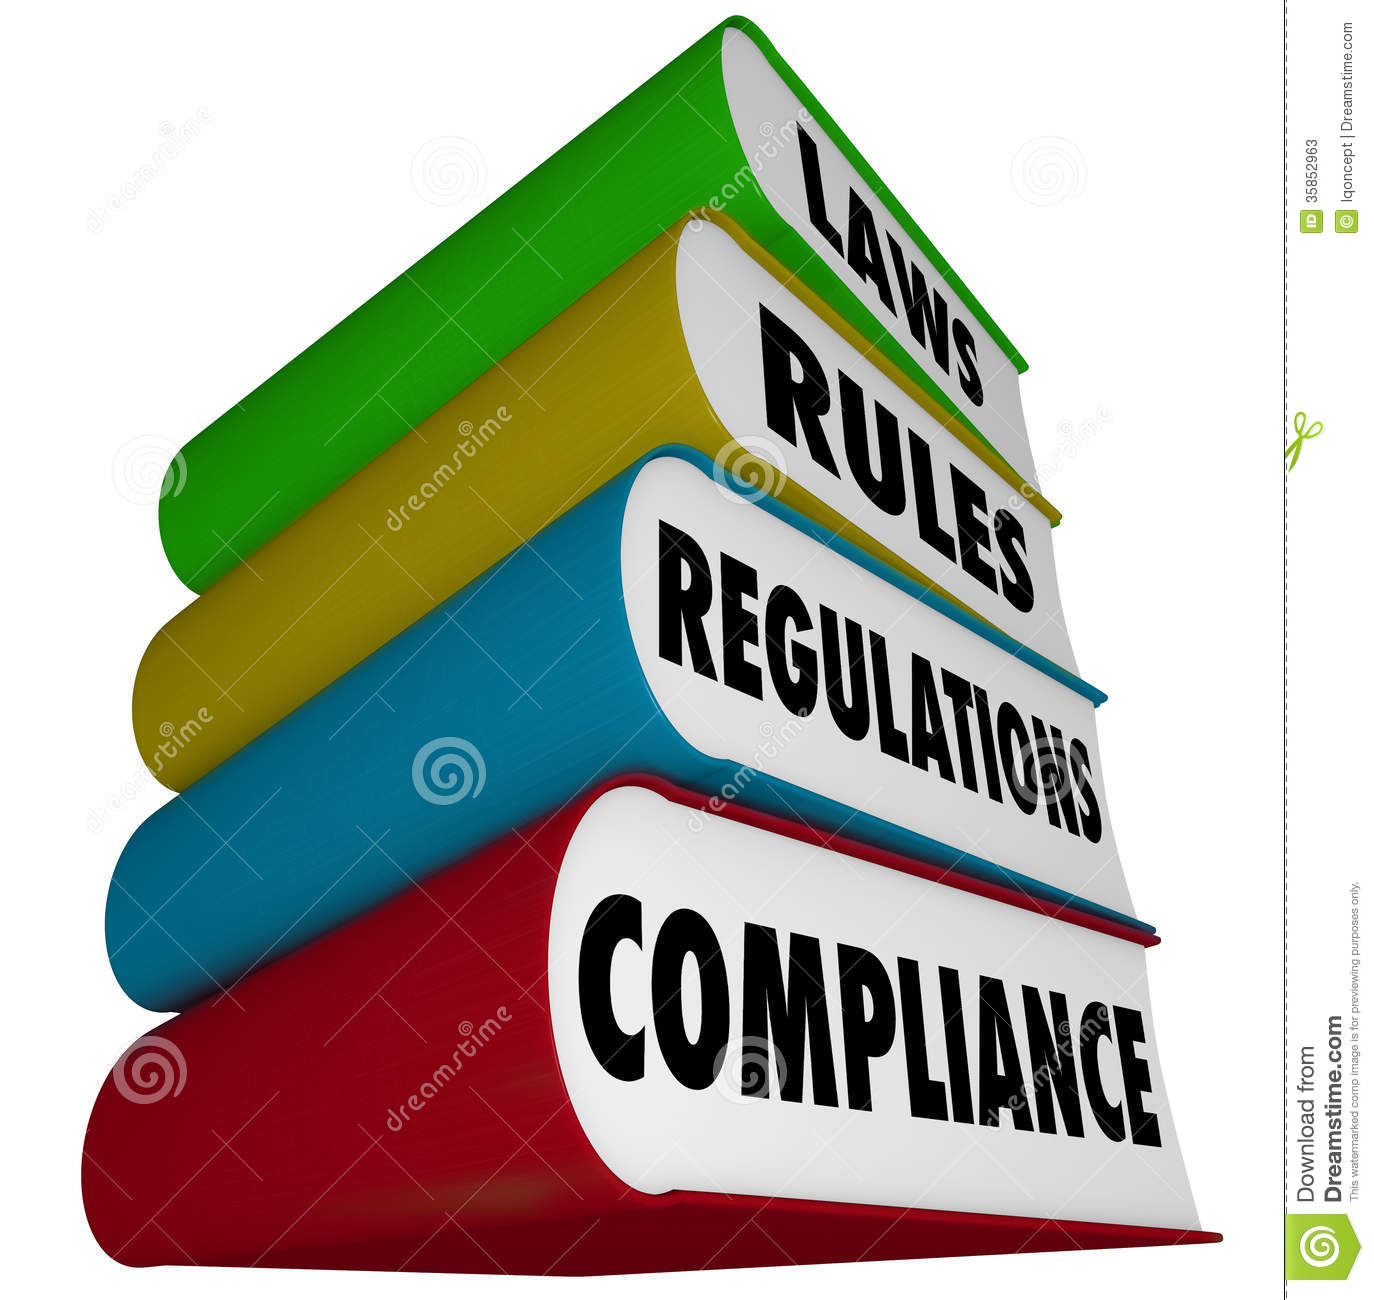 Law clipart law regulation. Laws cliparts free download